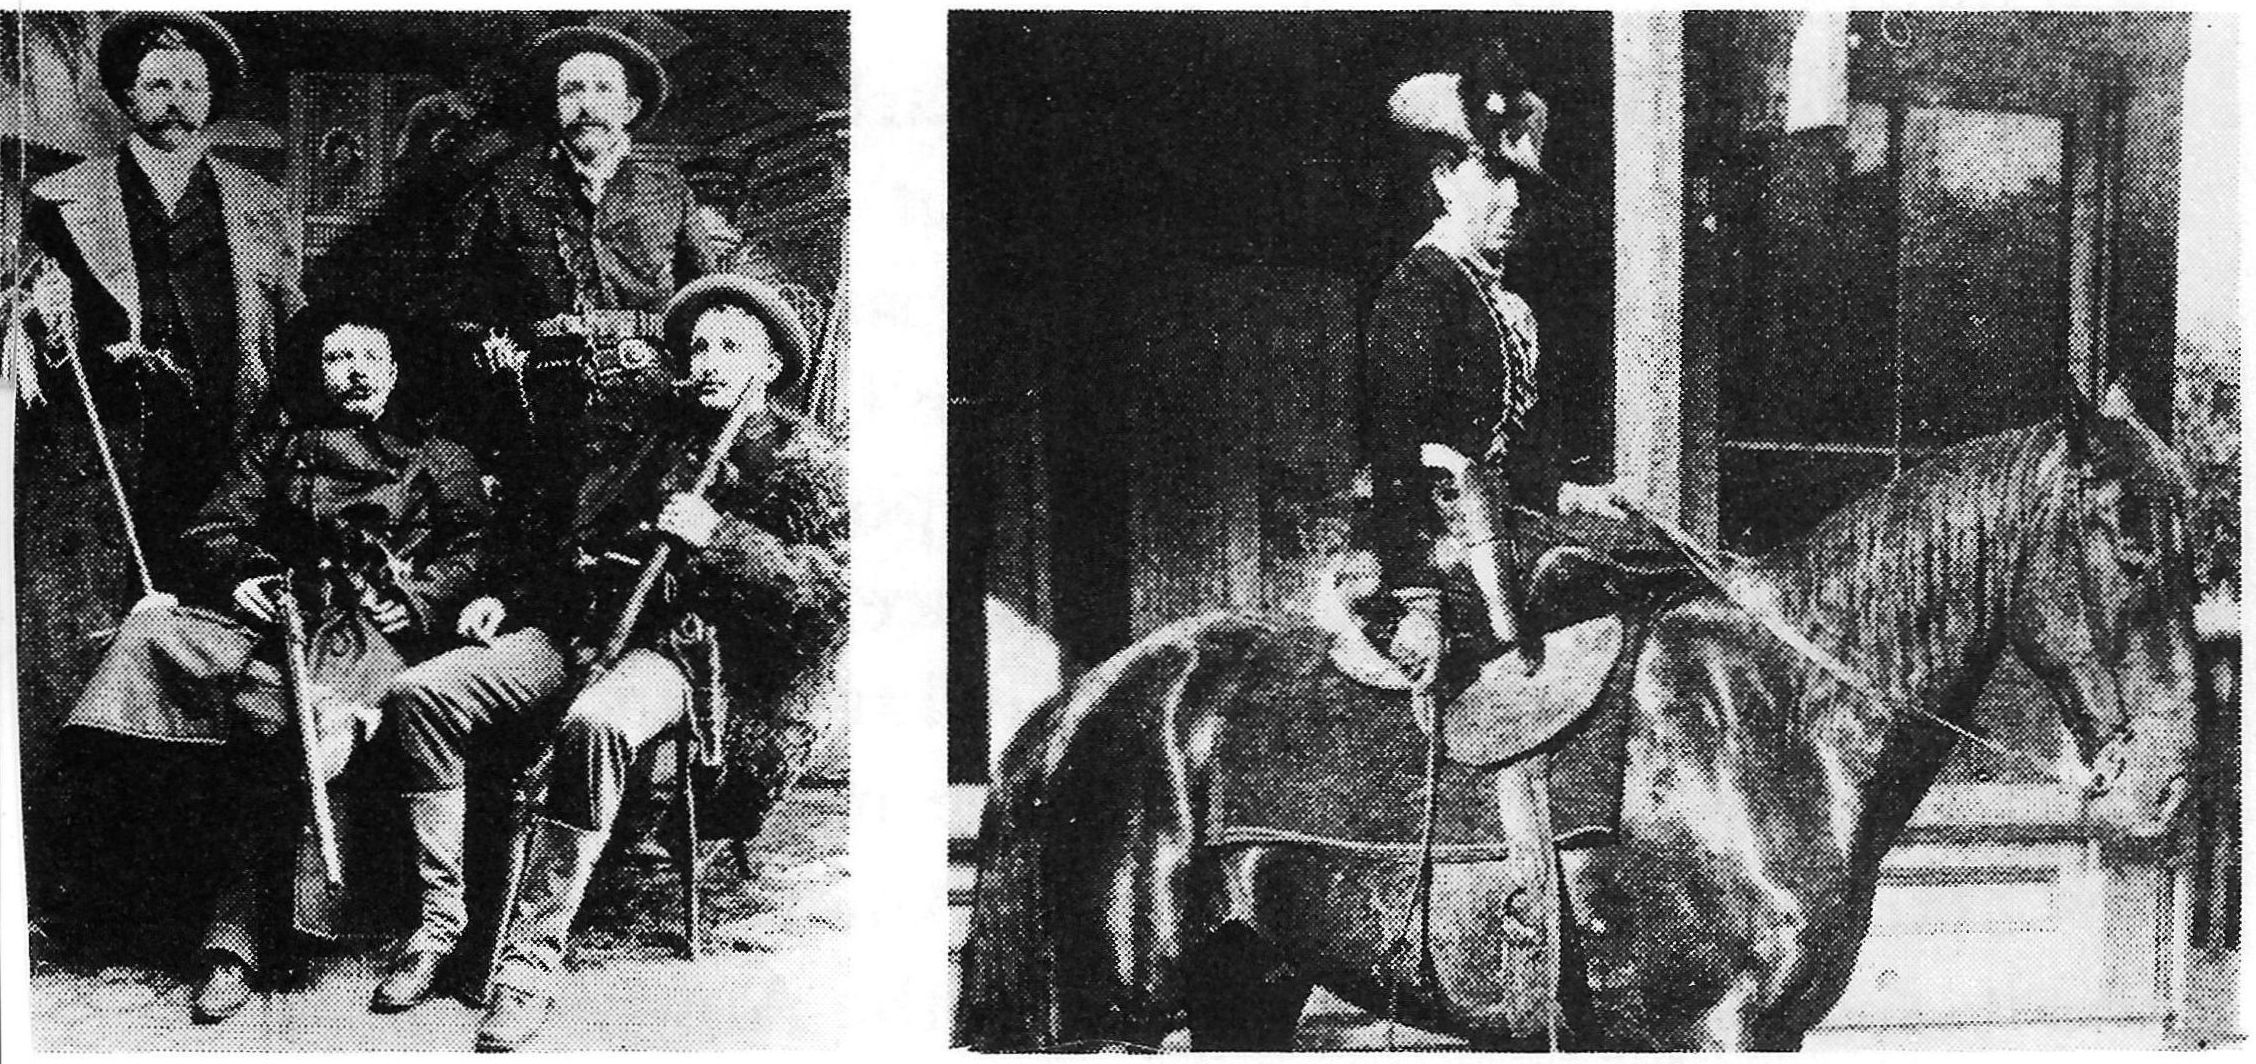 The Jesse James gang, and another notorious outlaw, Belle Starr.